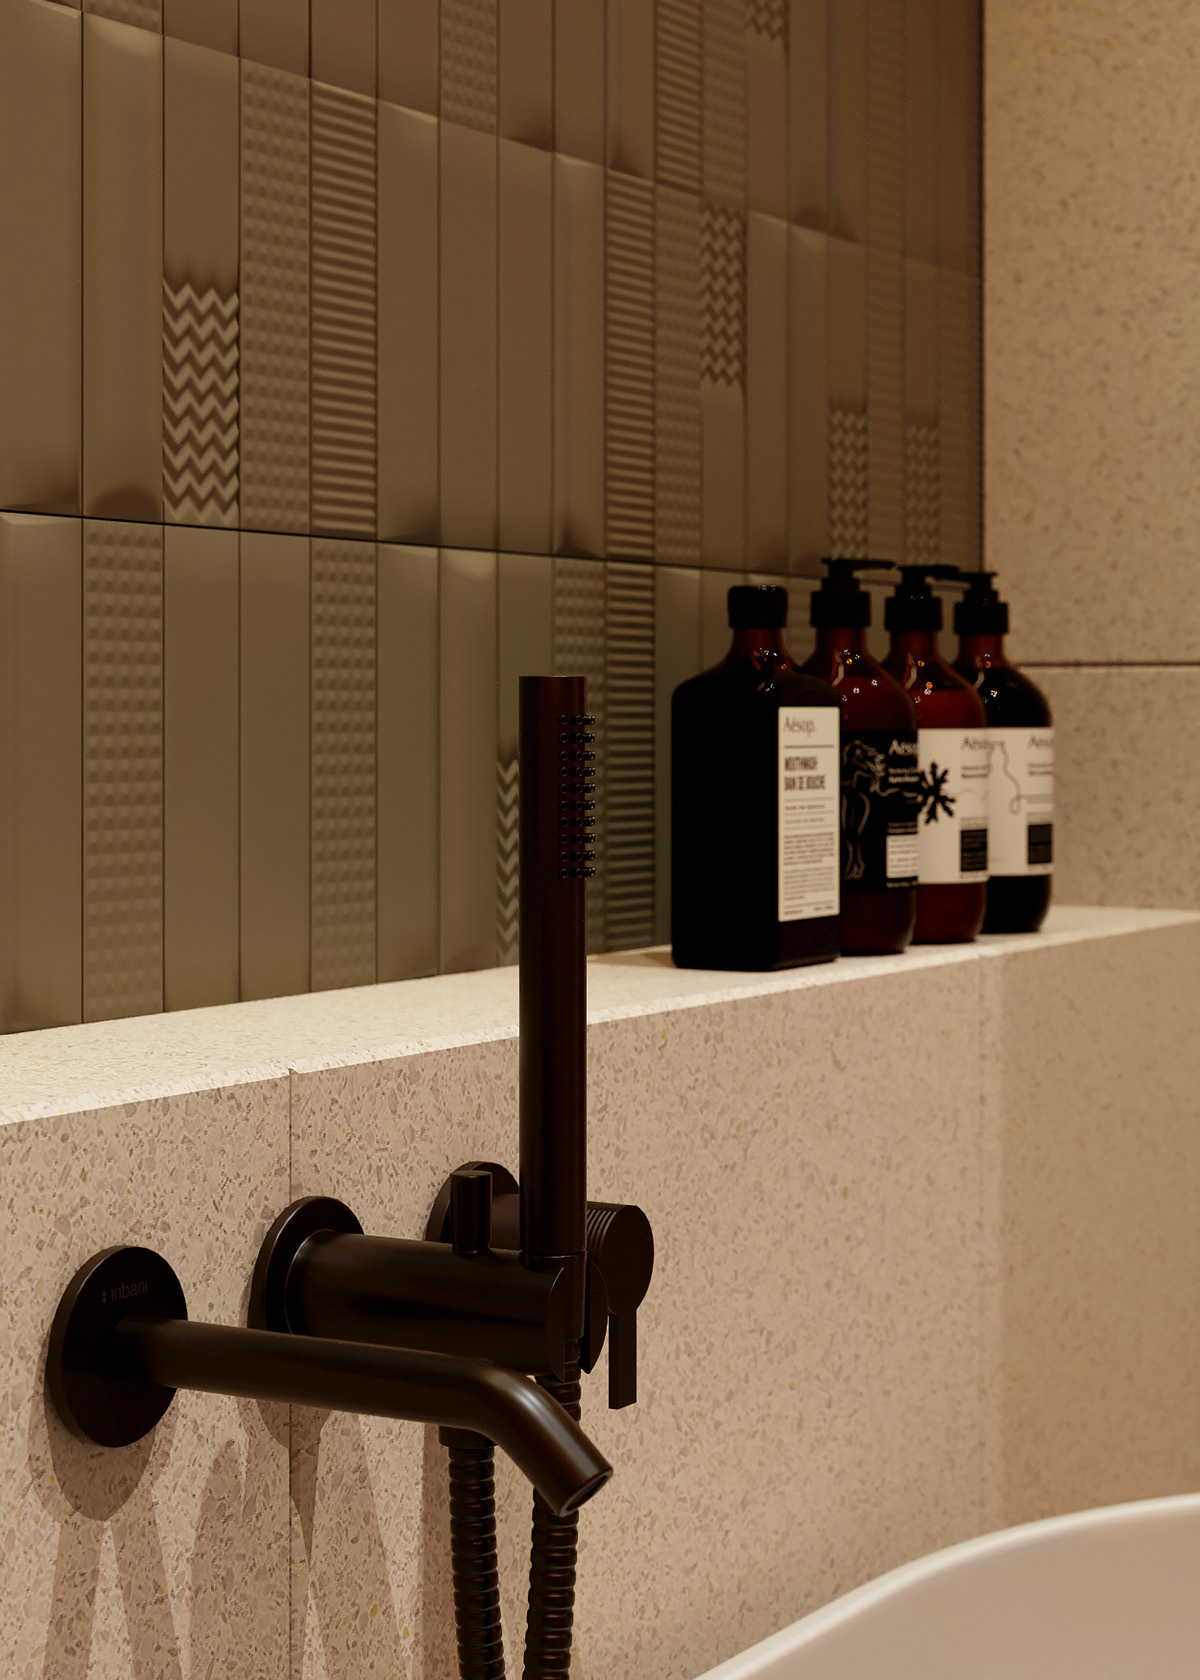 A highlight of this bathroom is the anti-slip faucet in matte black.